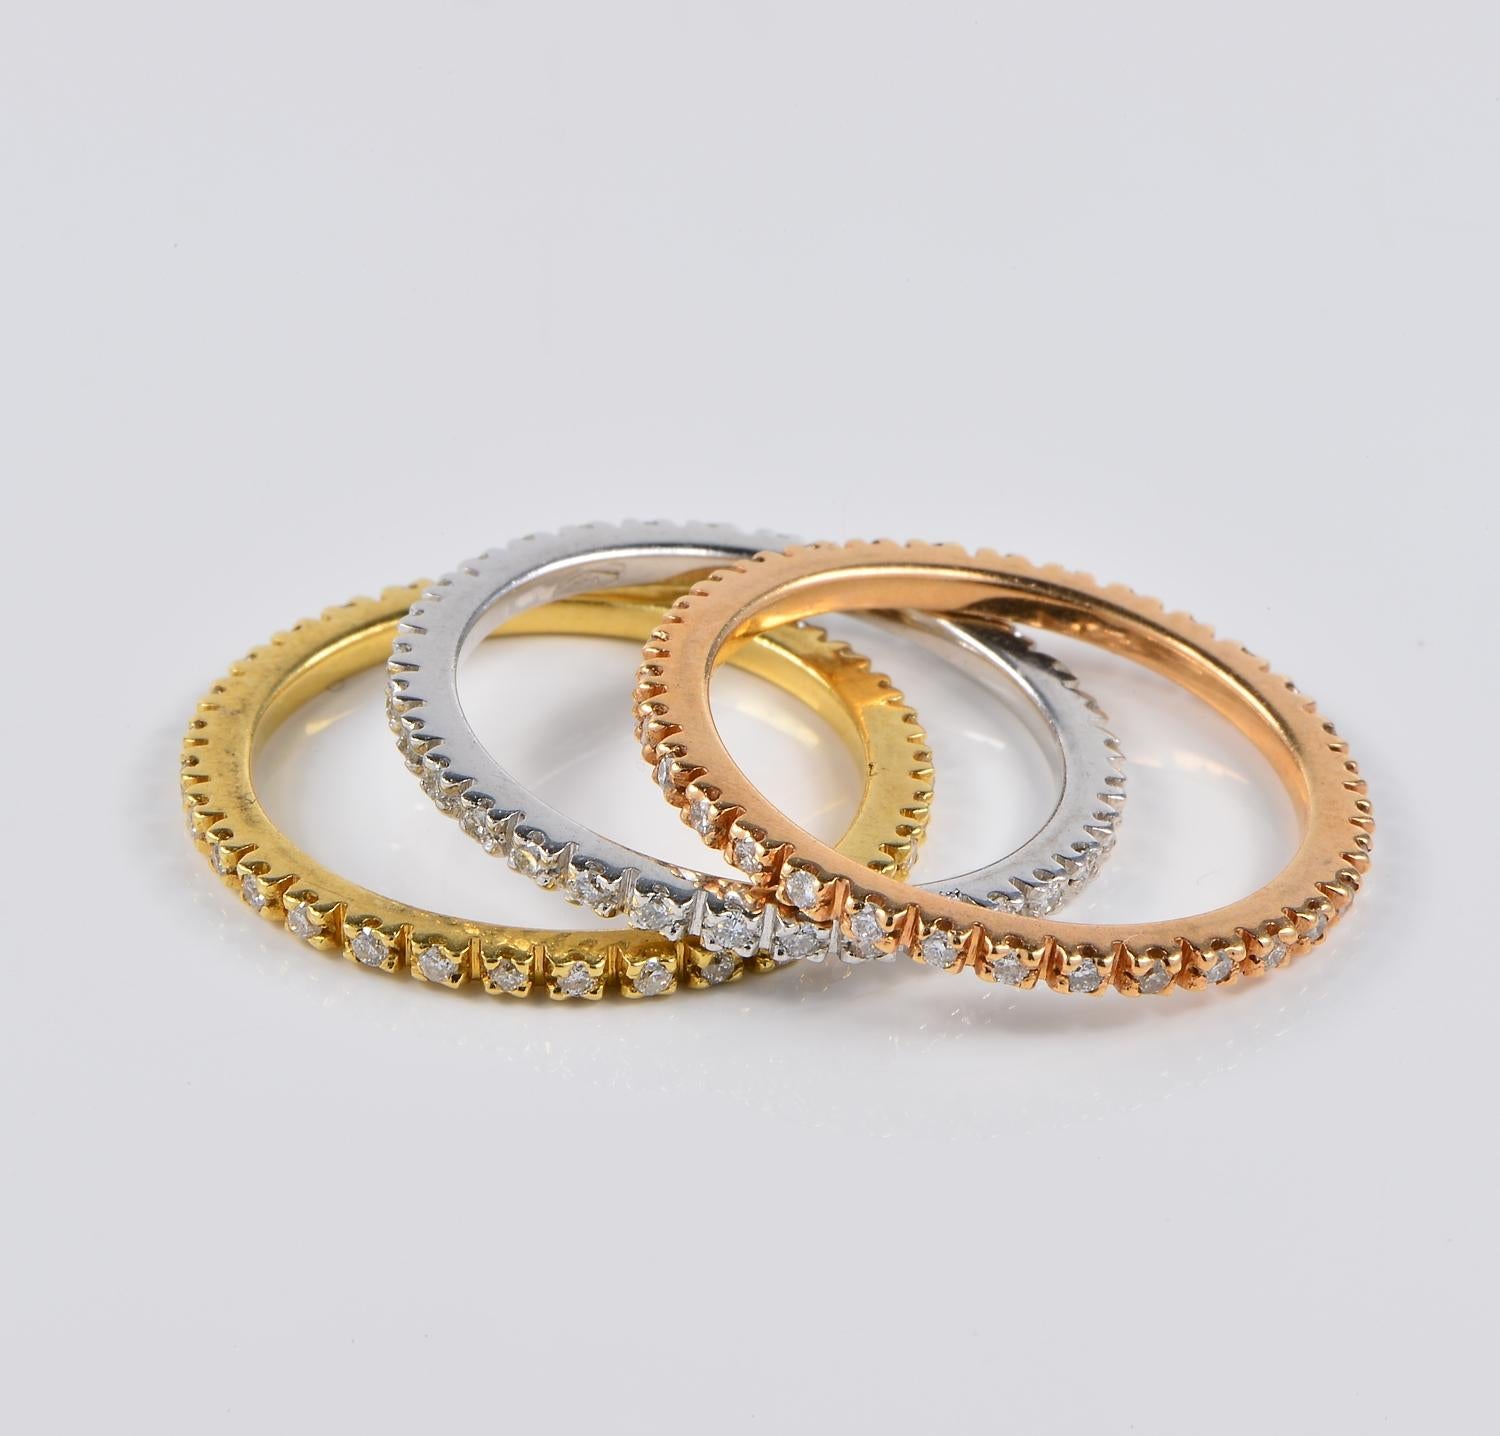 Distinctive trio of eternity rings
crafted of solid 18 KT gold marked
Appealing three colours of gold: white , yellow and rose gold
To stand all together, single or mixed with others
Set throughout with 96 Diamonds for .60 Ct of Brilliant cut